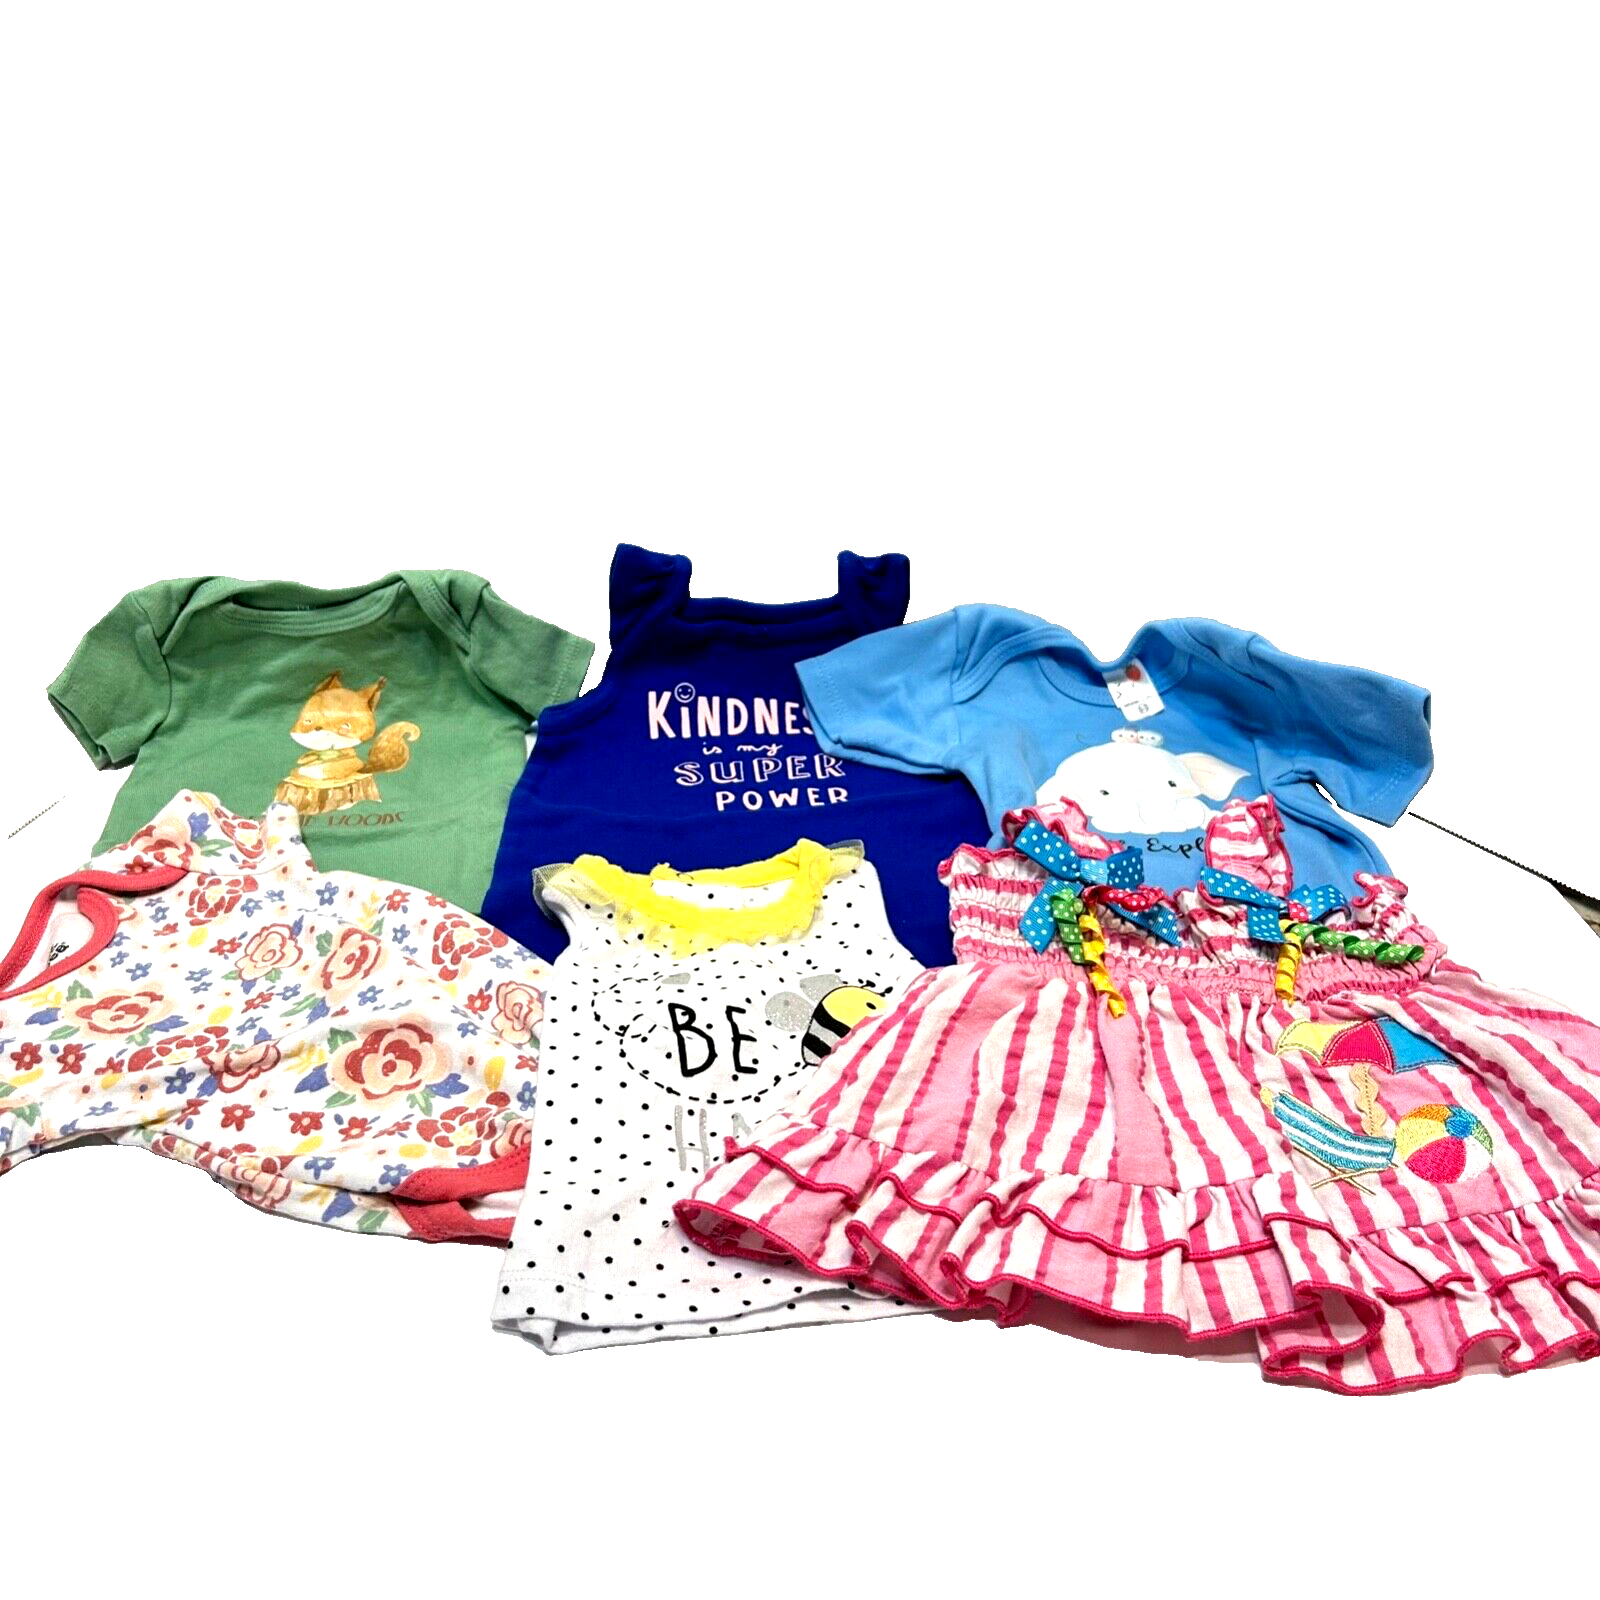 Mixed Lot 6 Baby Infant 0 to 3 months Outfits Carters Strawberry Chick Pea - $19.53